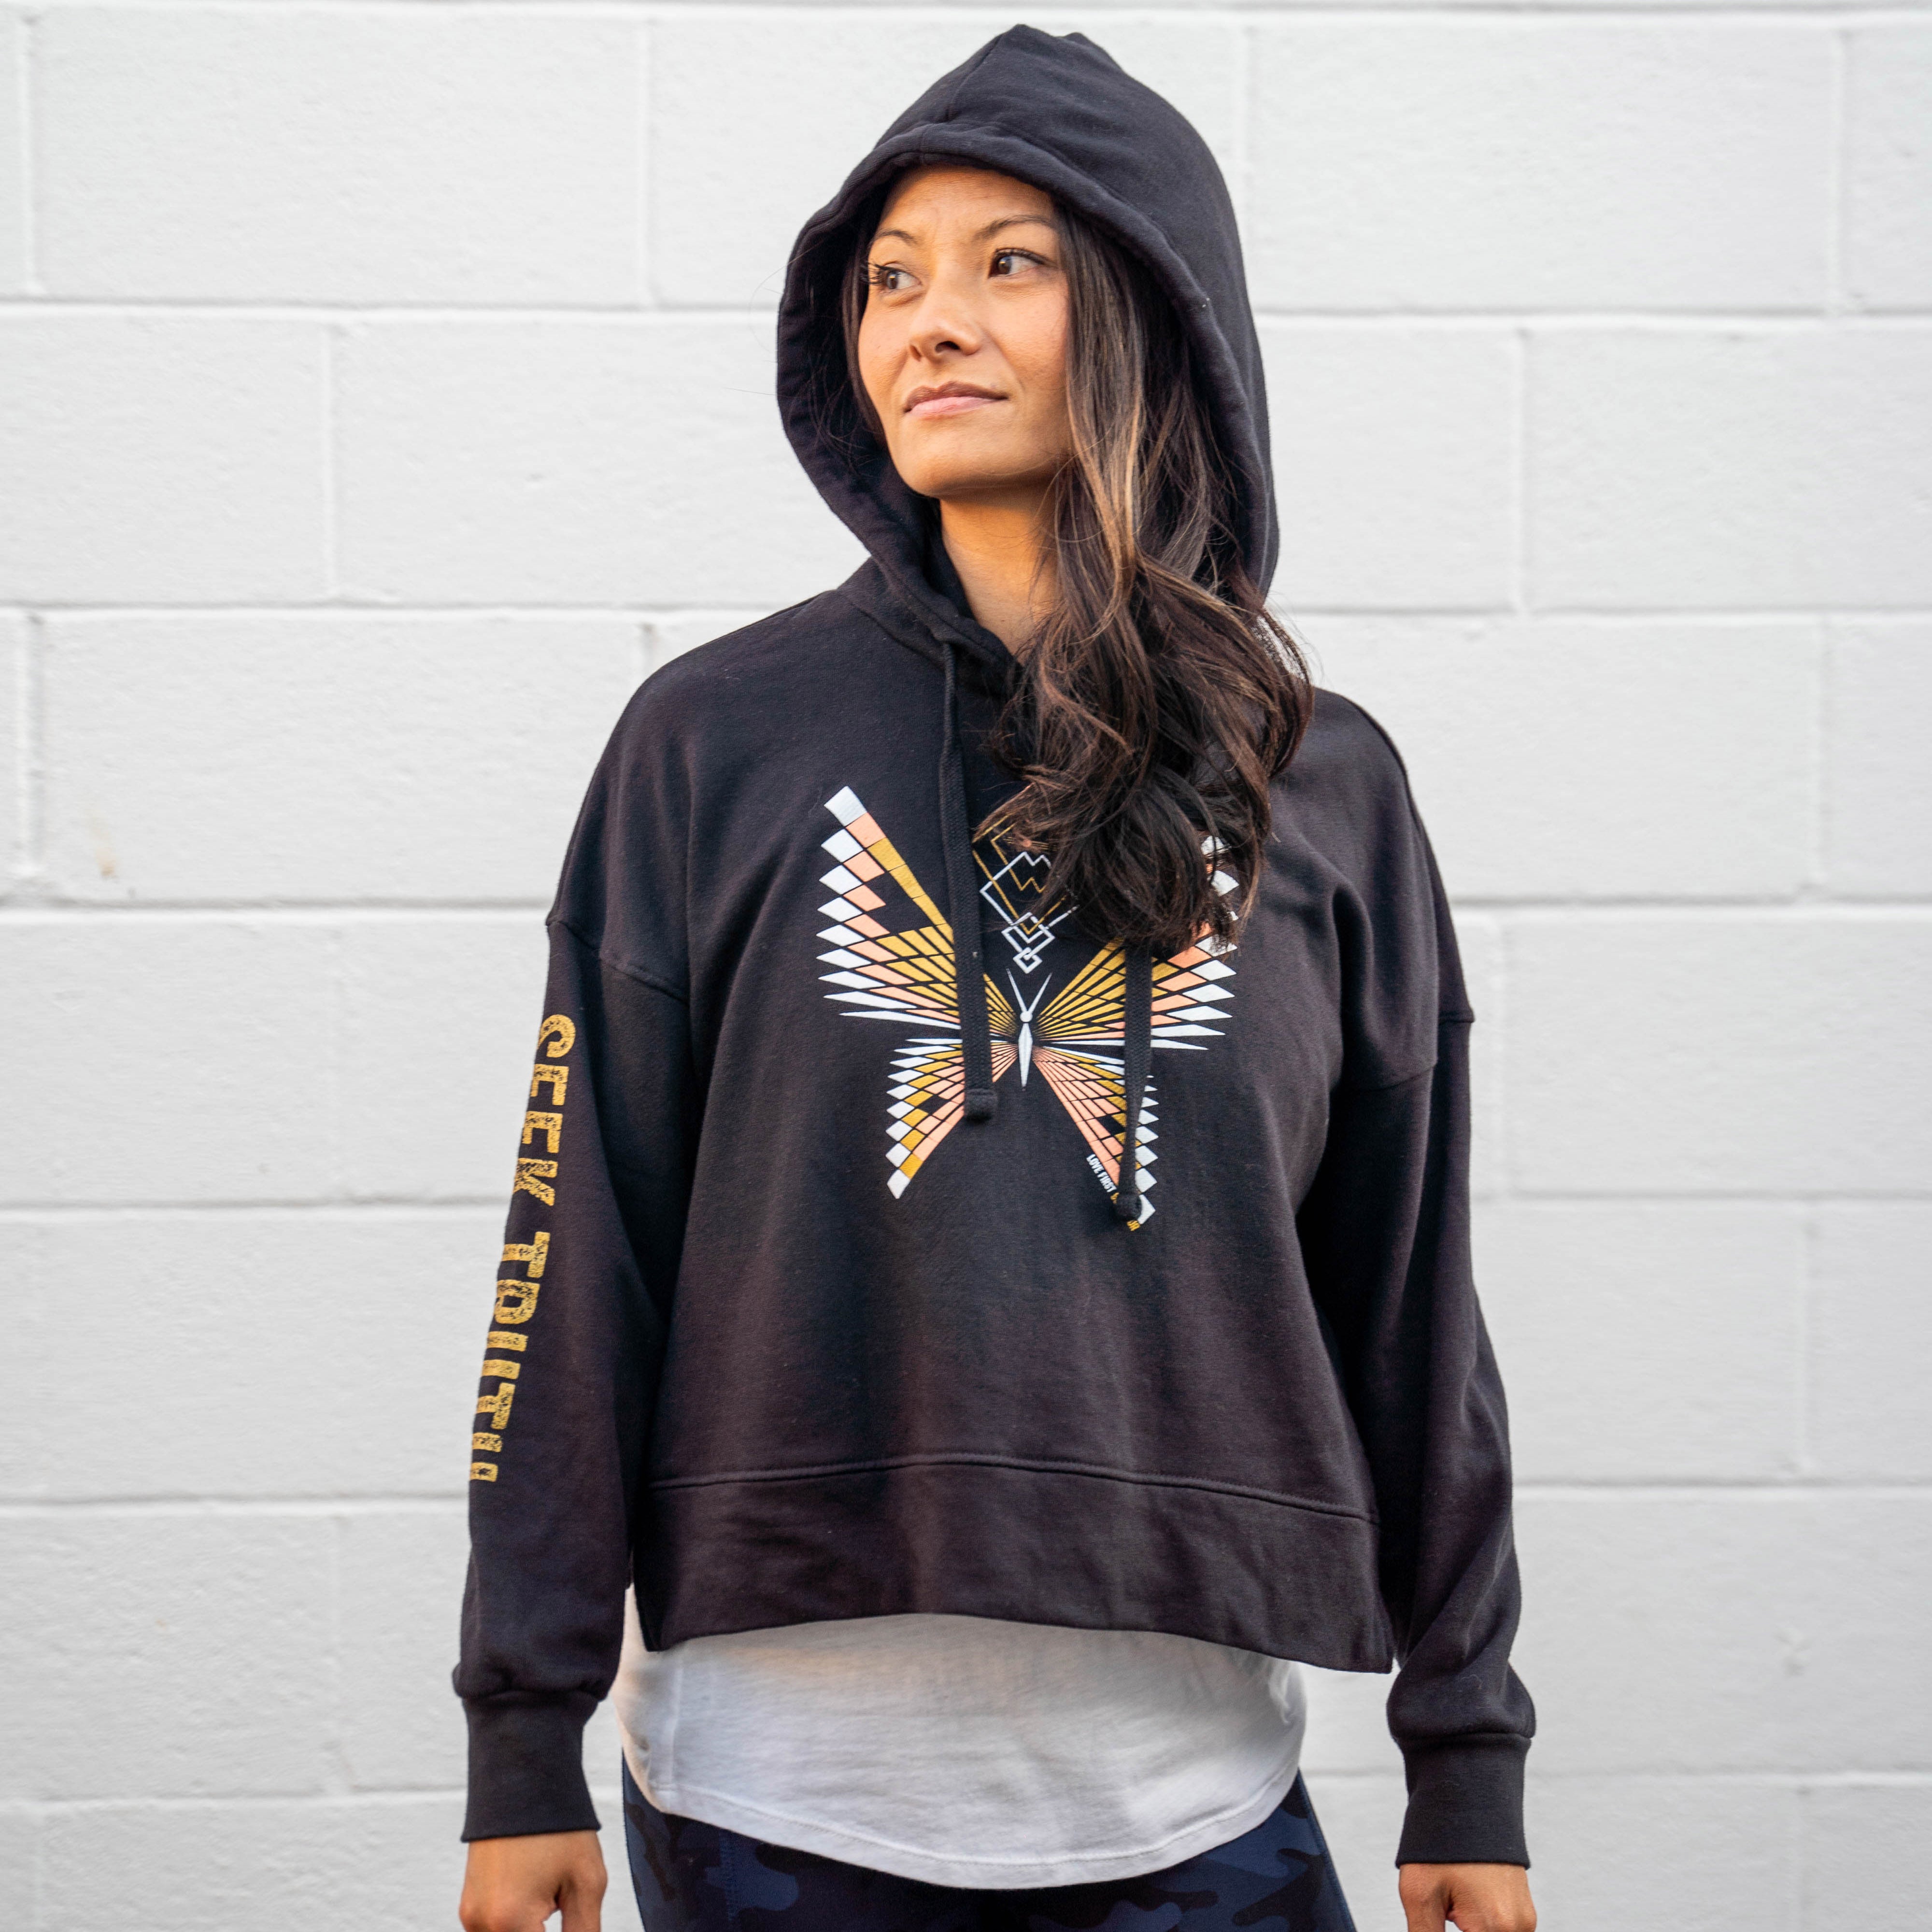 Butterfly Transformation Eco-Crop Hoodie